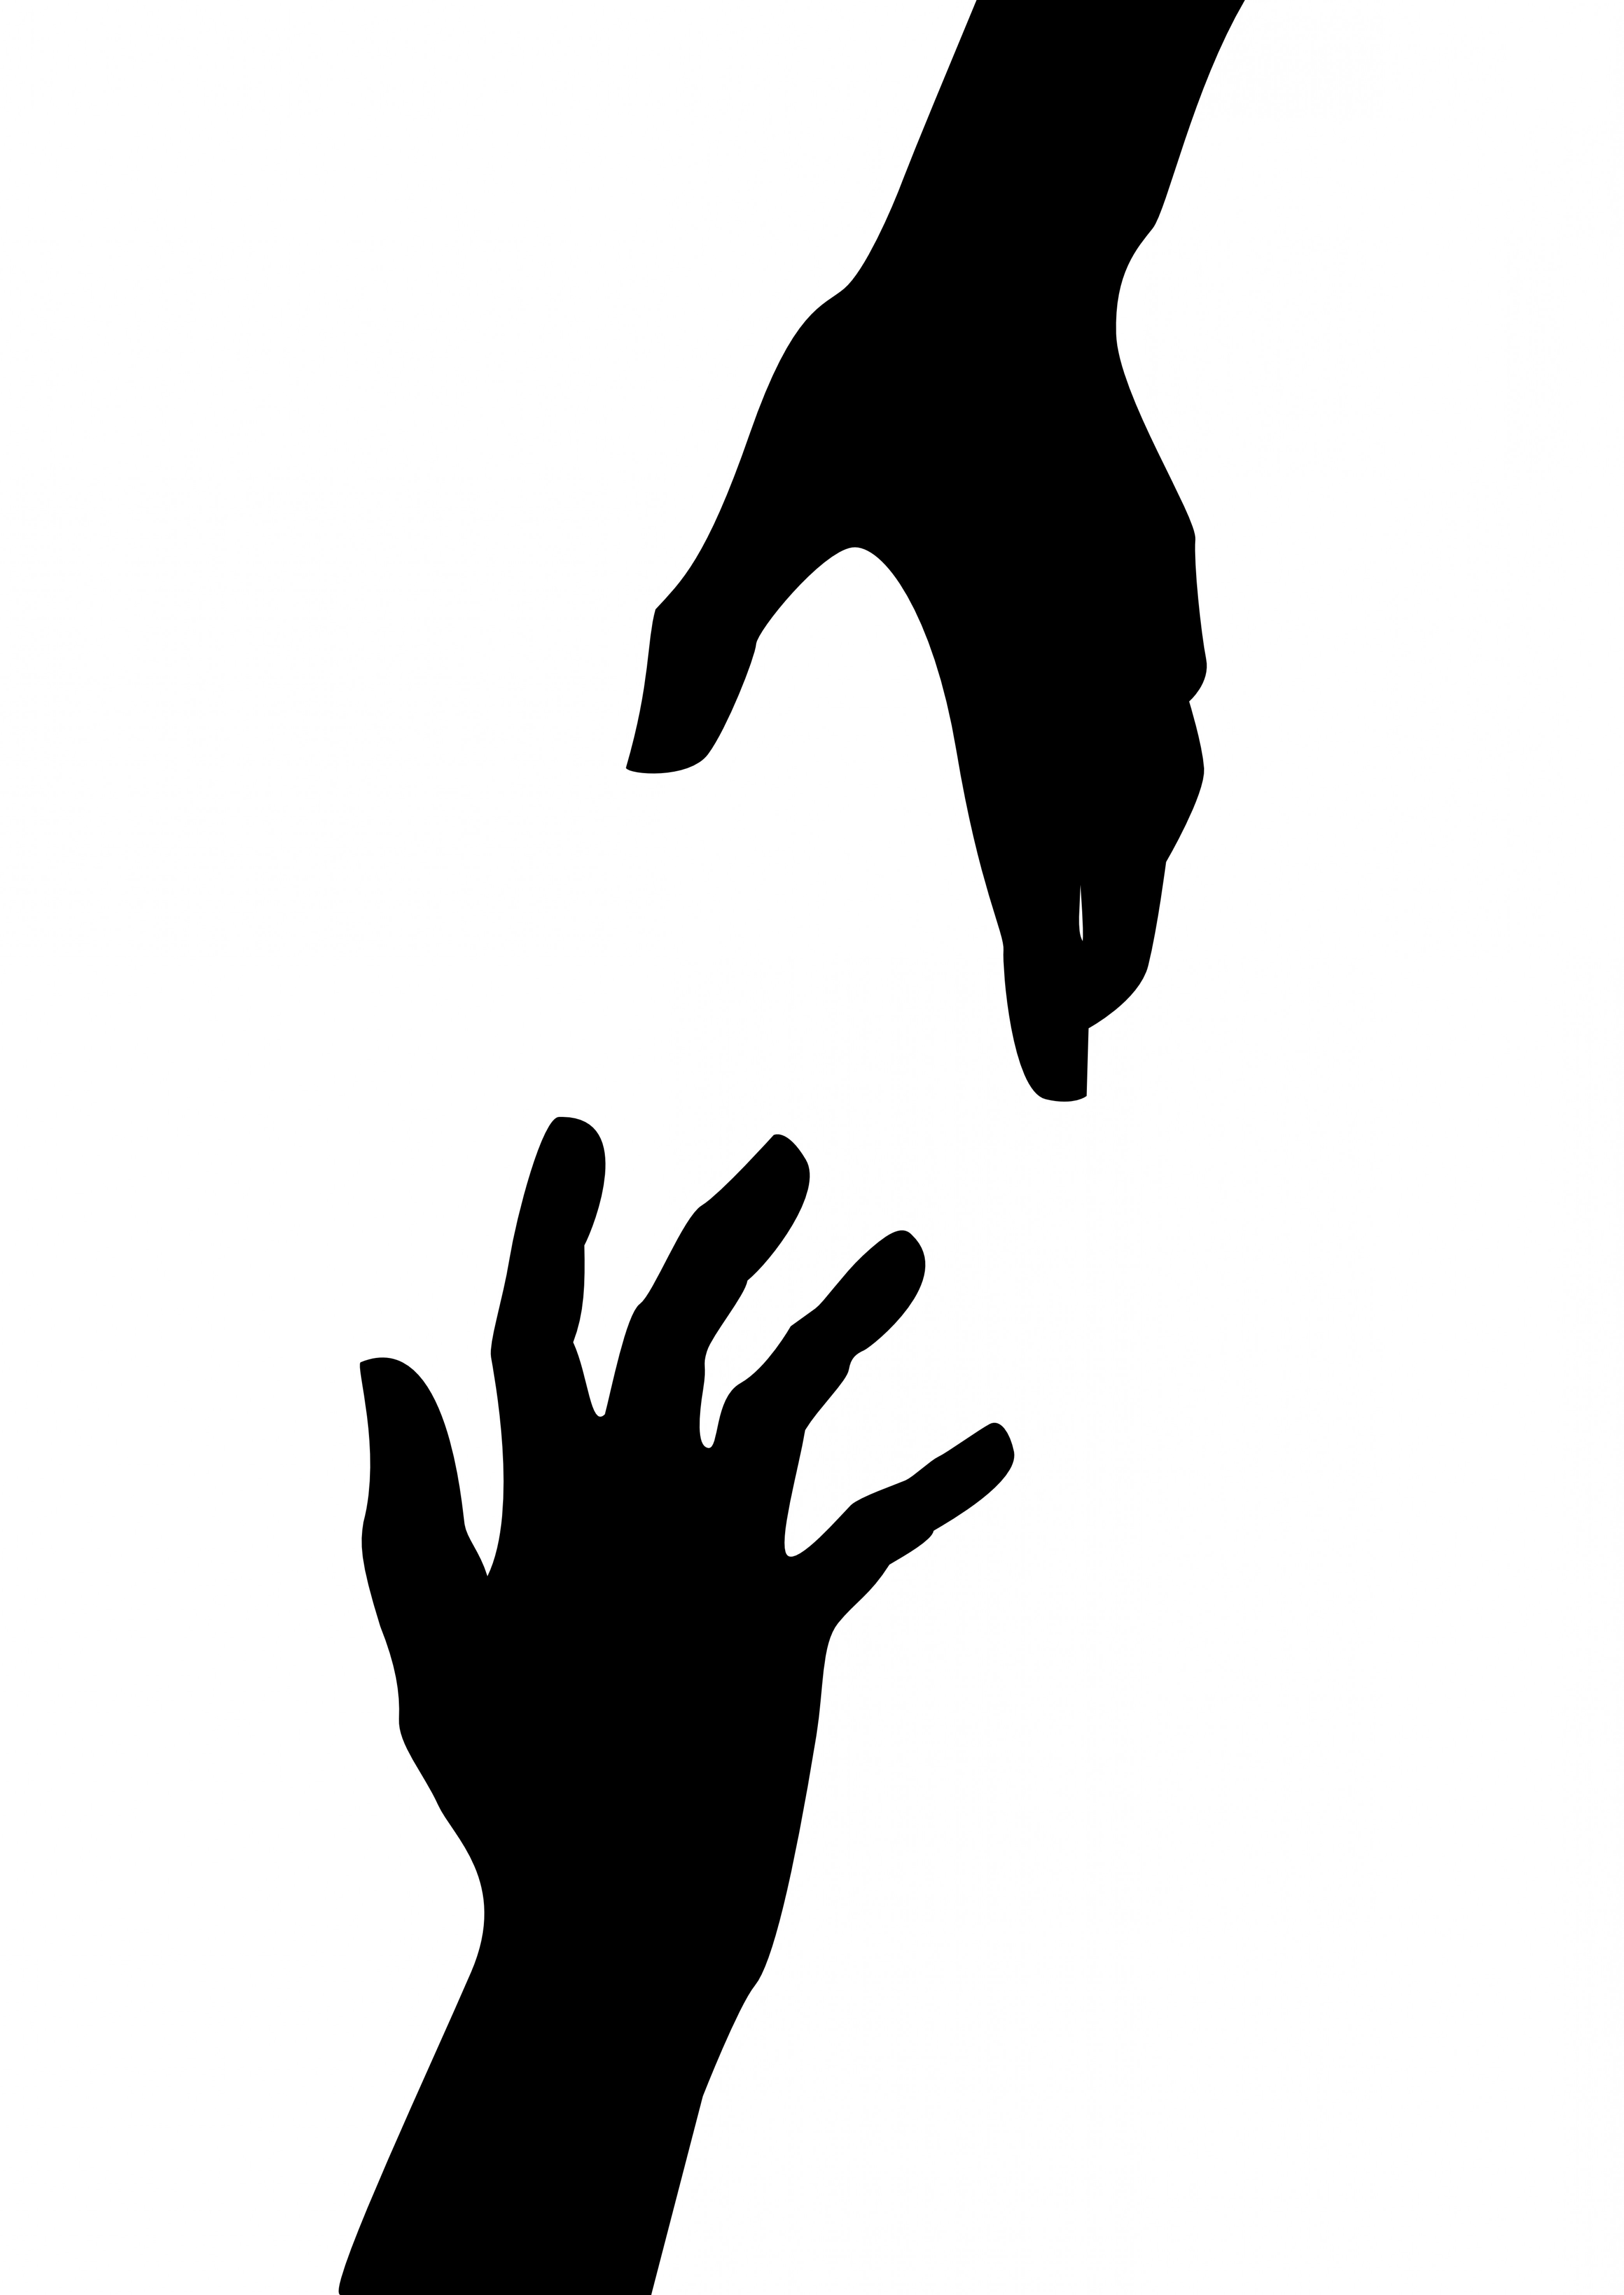 Exclusive Reaching Hand Silhouette Clip Art Graphic